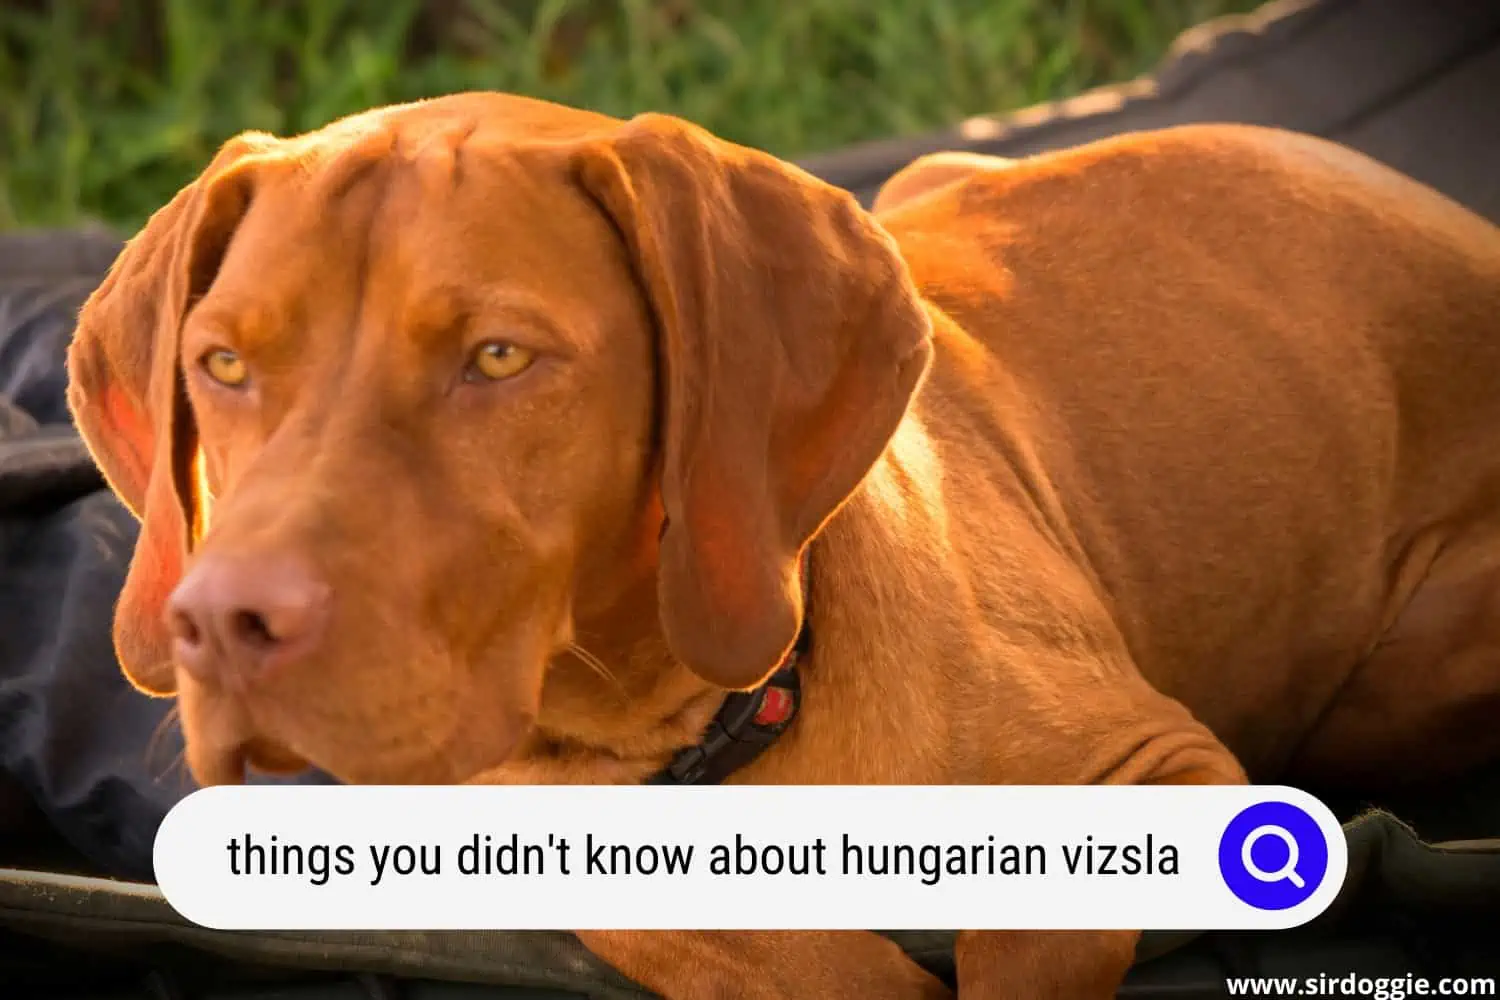 things you didn't know about the hungarian vizsla